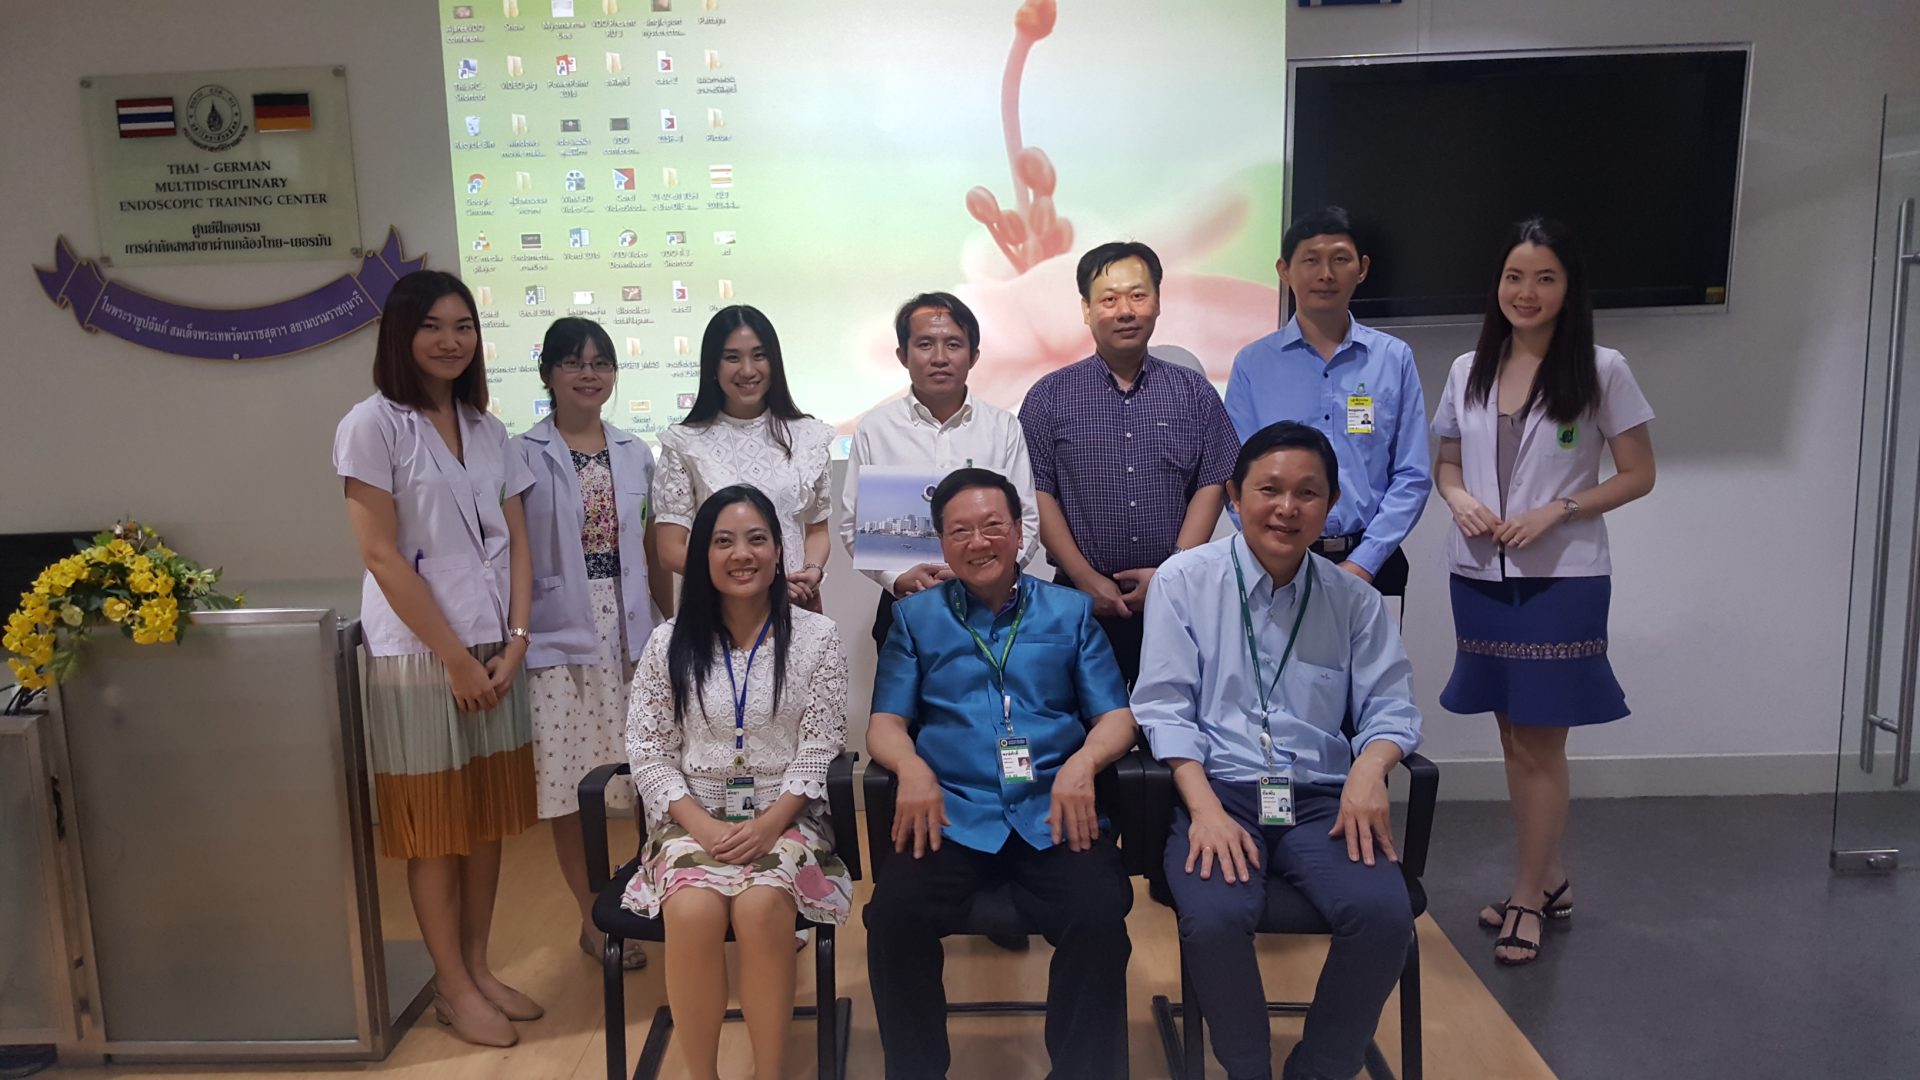 Doctors from Laos Succesfully Completed the Short Training Program at Siriraj